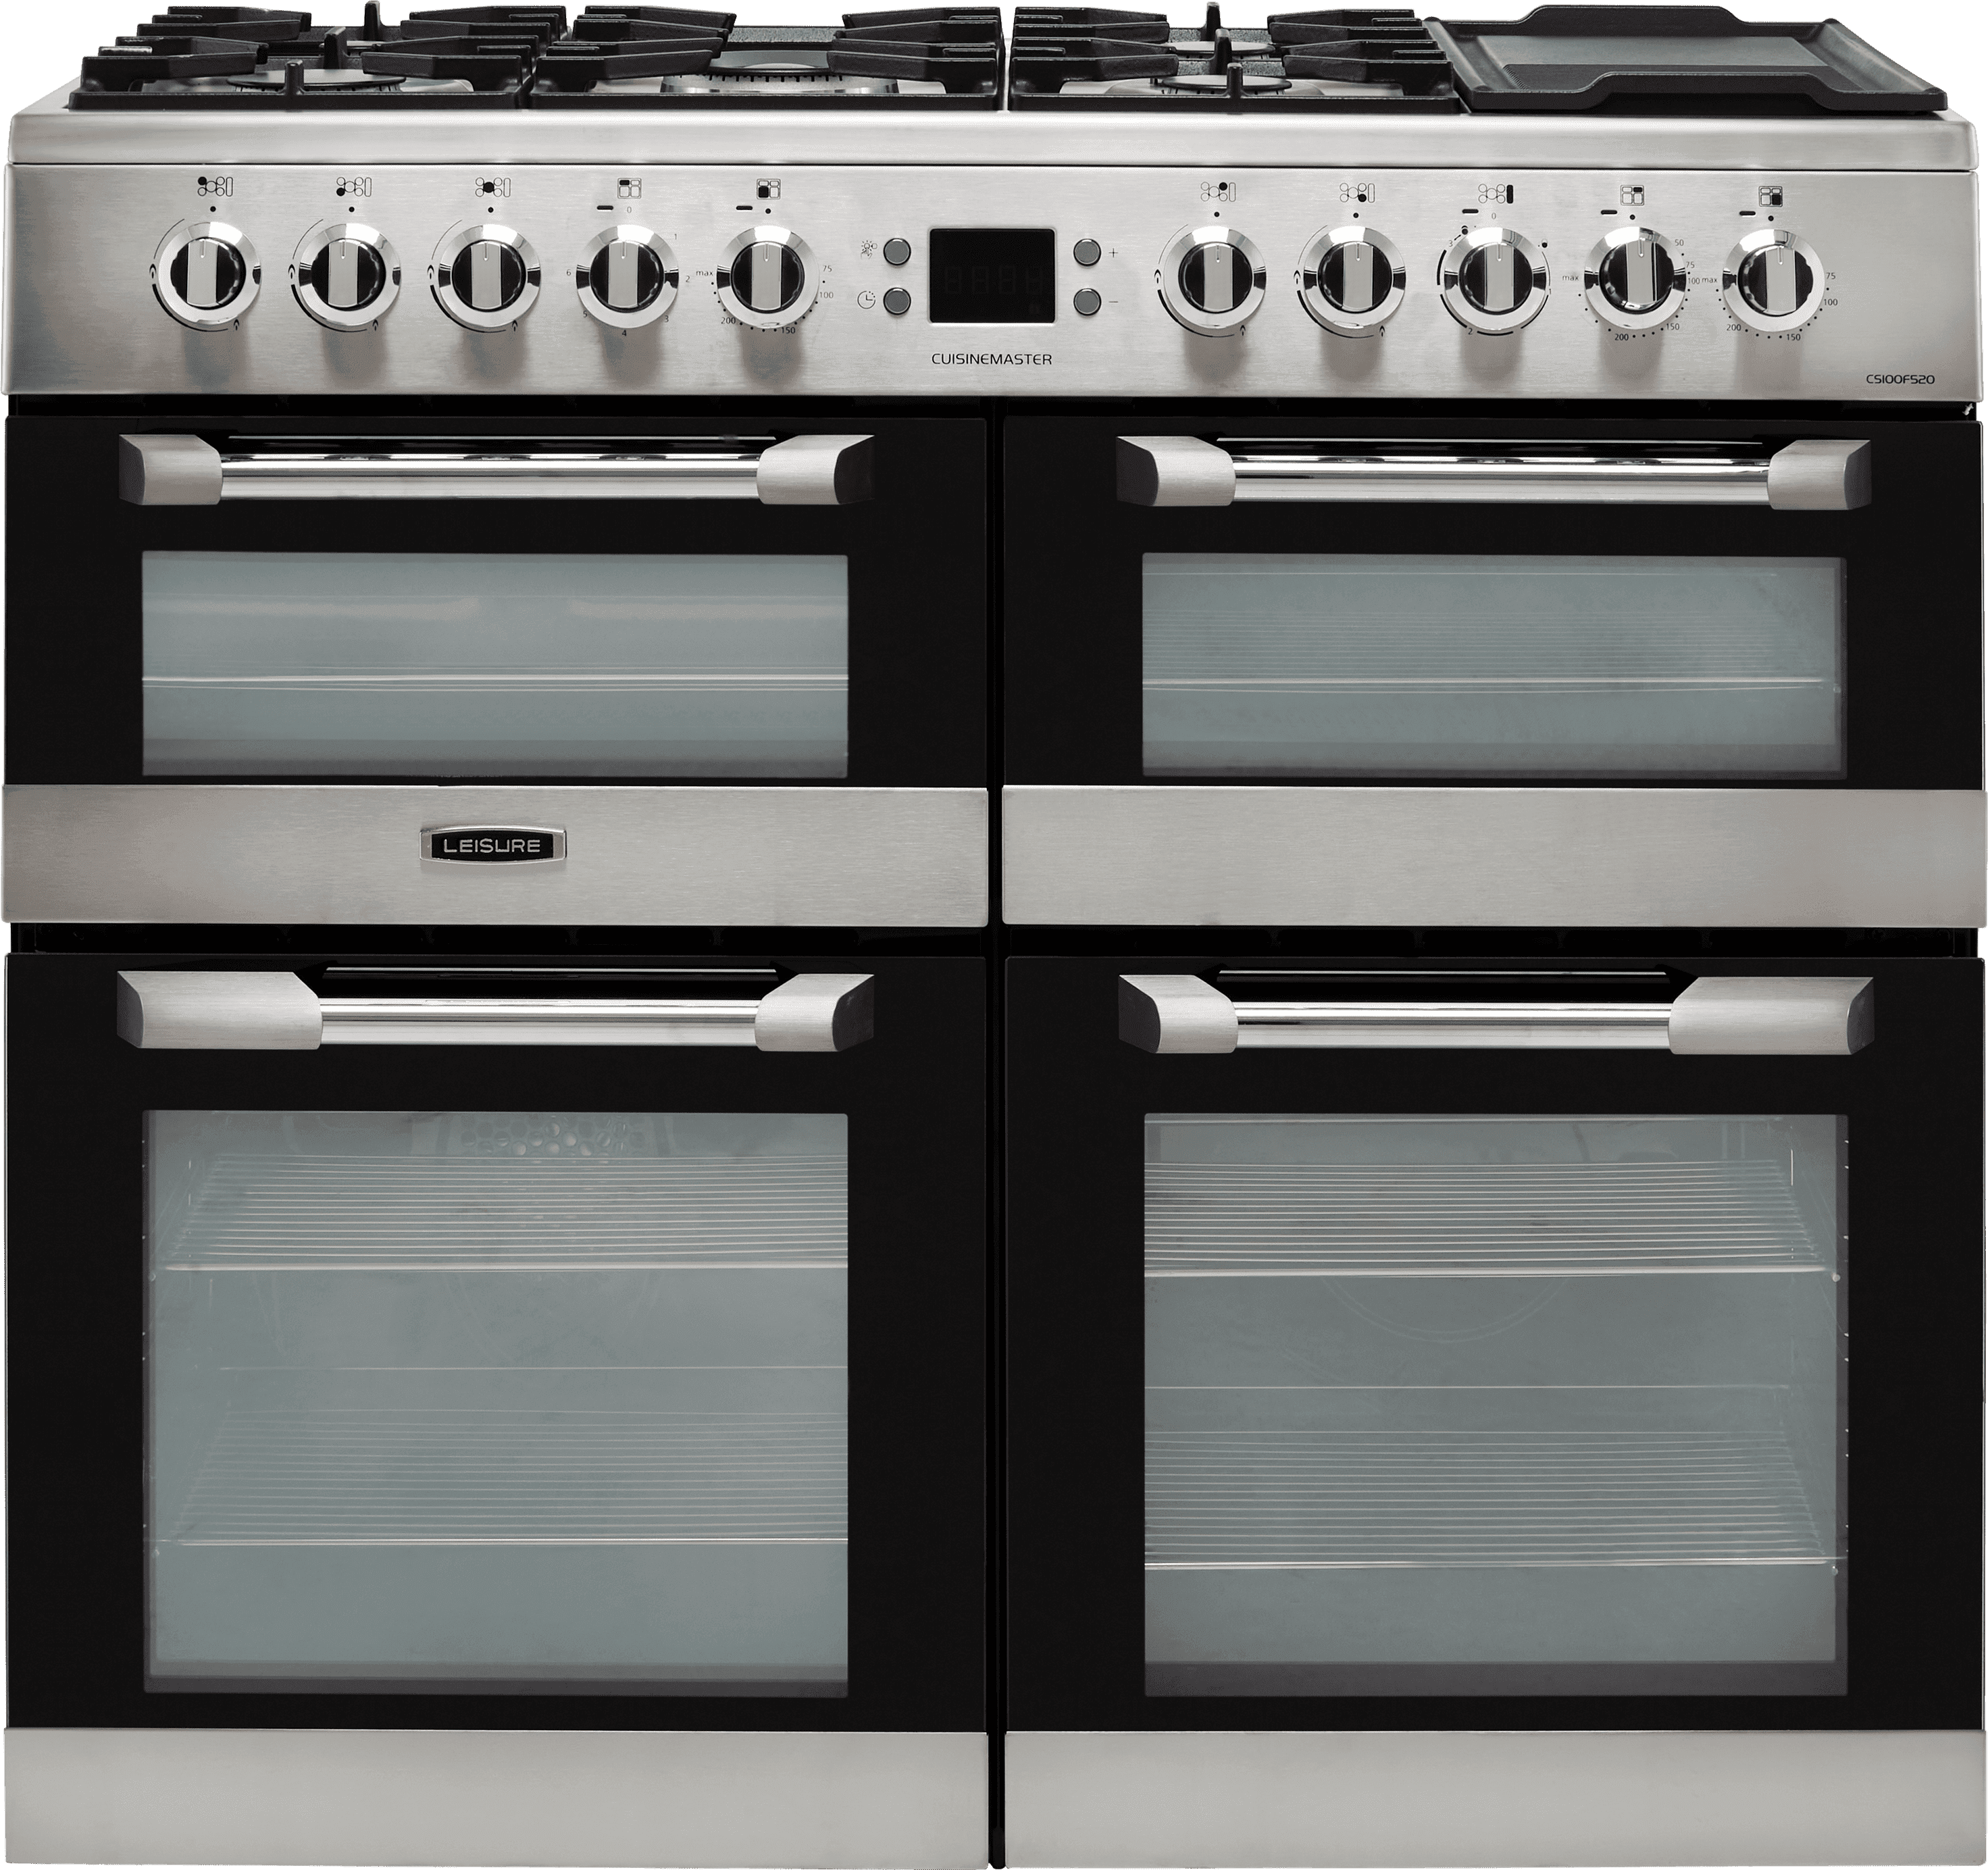 Leisure Cuisinemaster CS100F520X 100cm Dual Fuel Range Cooker - Stainless Steel - A/A/A Rated, Stainless Steel